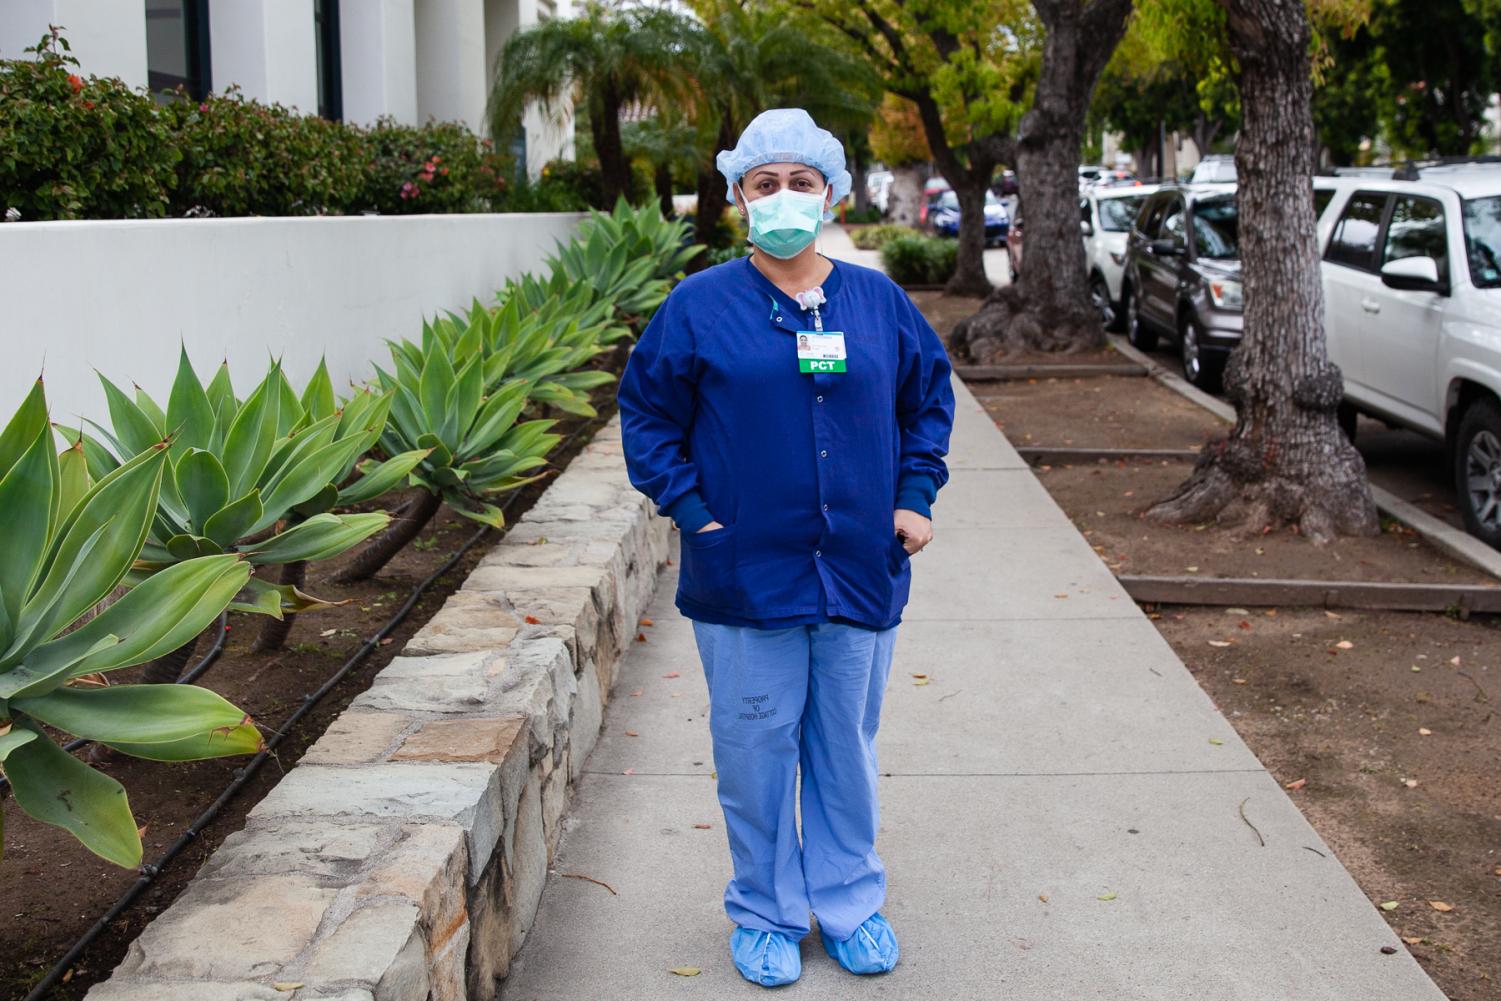 Unit Care Coordinator Johanna Hoyos works in the surgery department at Cottage Hospital in Santa Barbara, Calif. “It’s been hard personally because I work nights now and everyone is being shifted around,” Said Hoyos. “The hospital is doing great at protecting us with all the precautions, I feel as safe here as I do at home.”